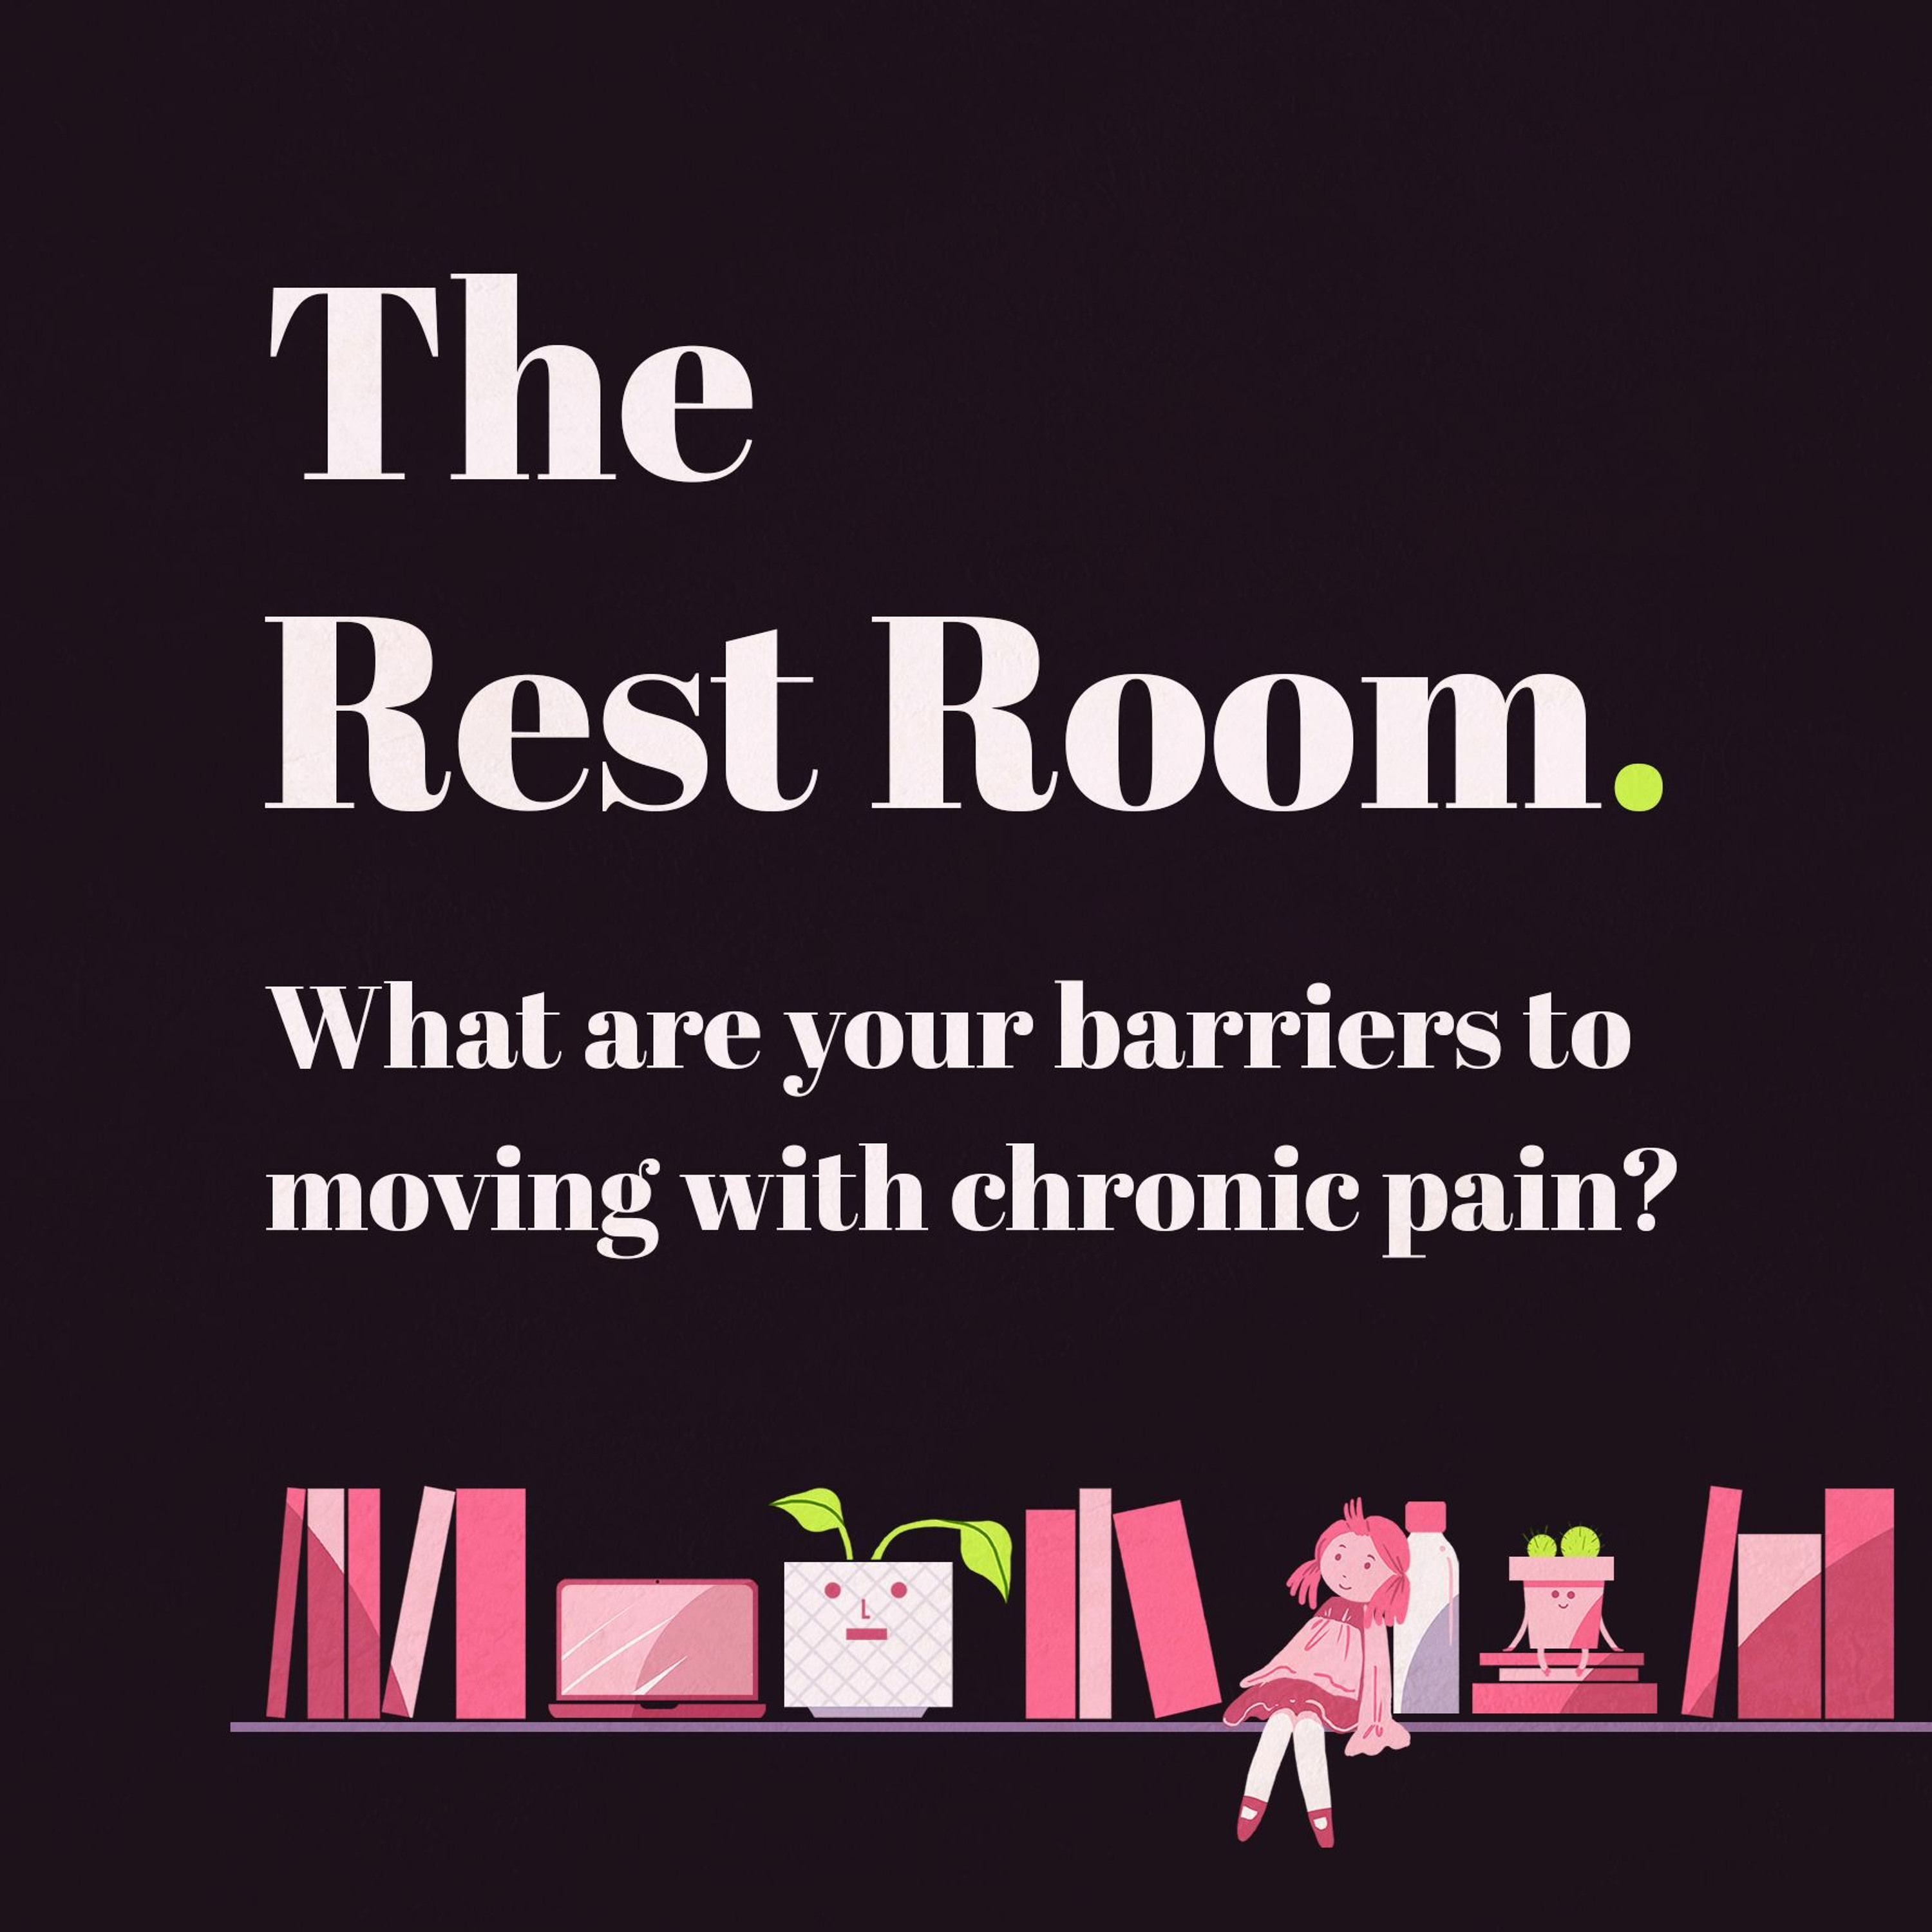 What are your barriers to moving with chronic pain?